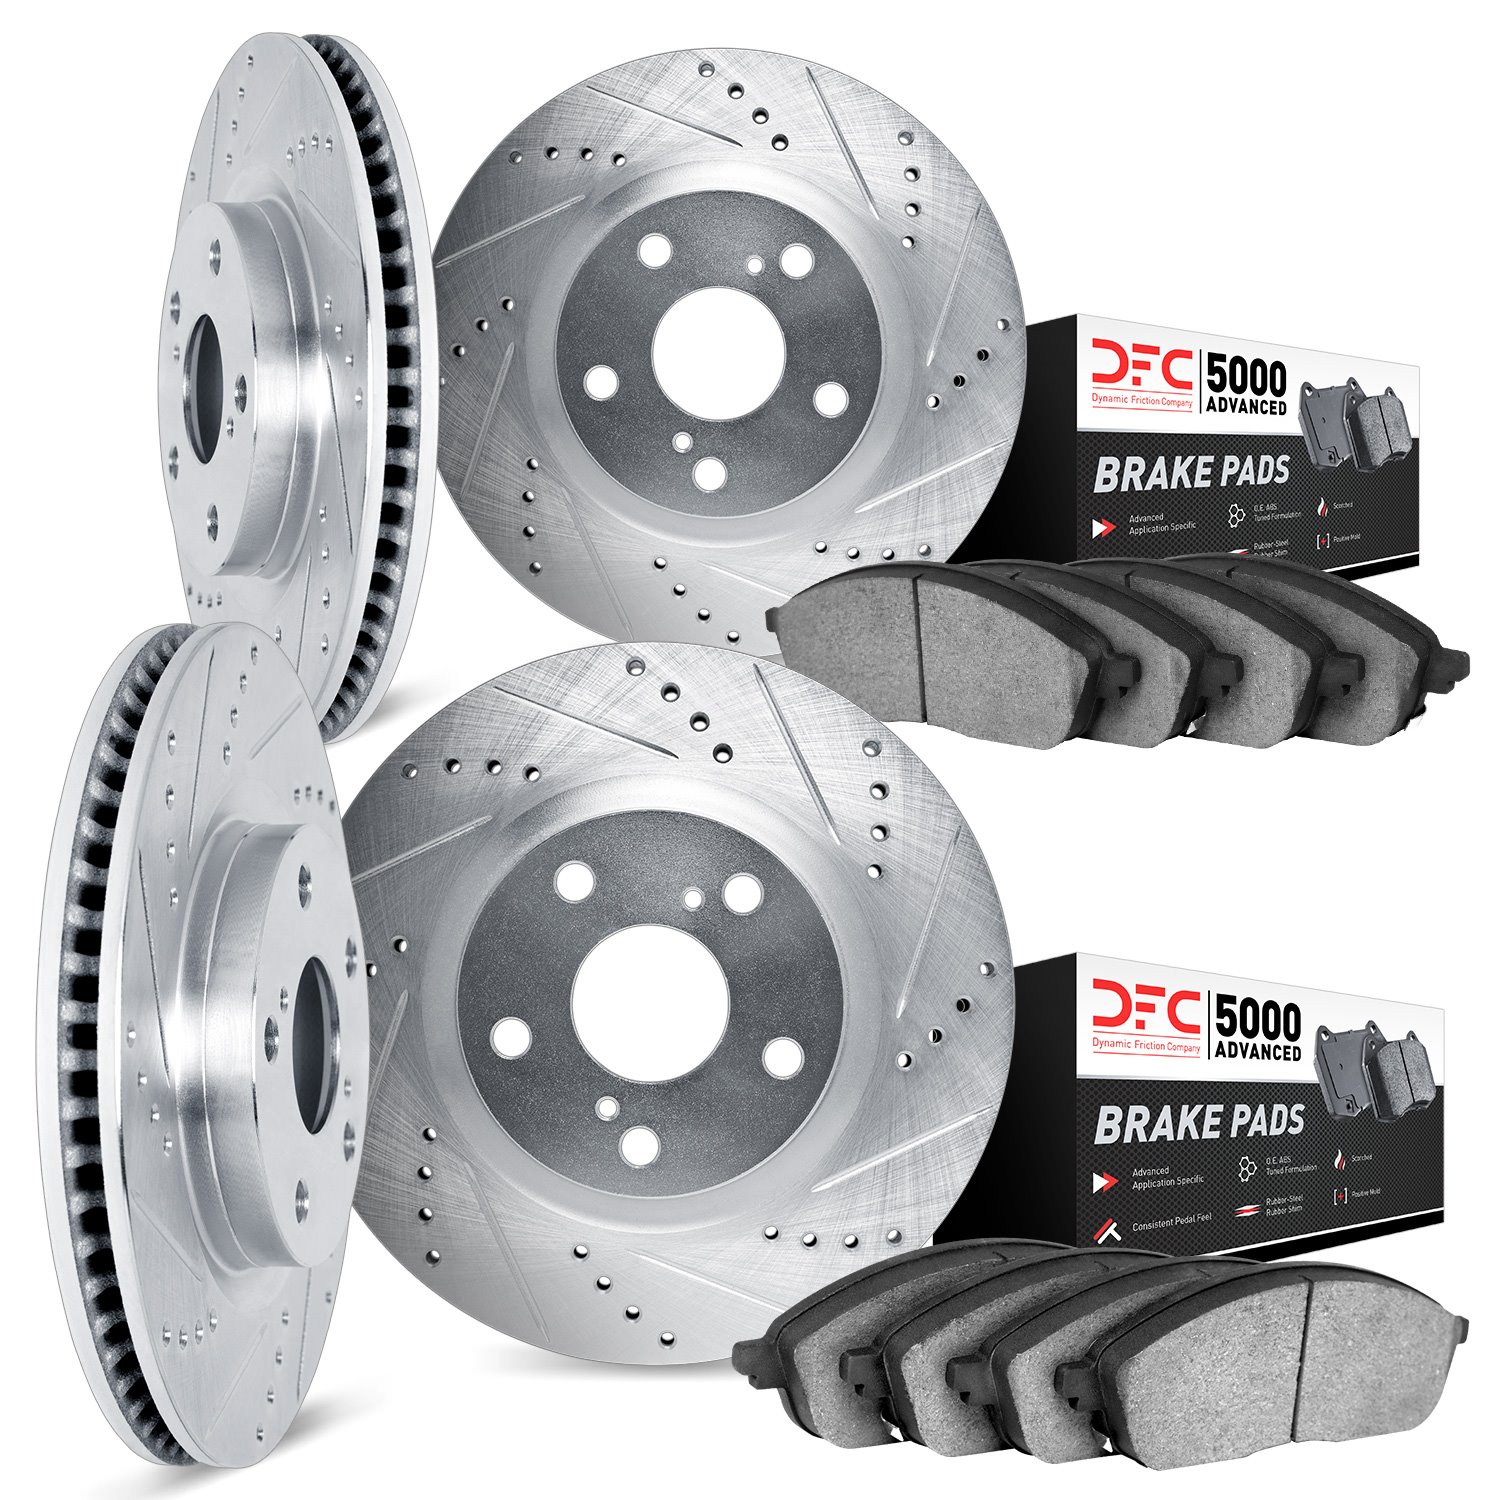 7504-39024 Drilled/Slotted Brake Rotors w/5000 Advanced Brake Pads Kit [Silver], Fits Select Mopar, Position: Front and Rear